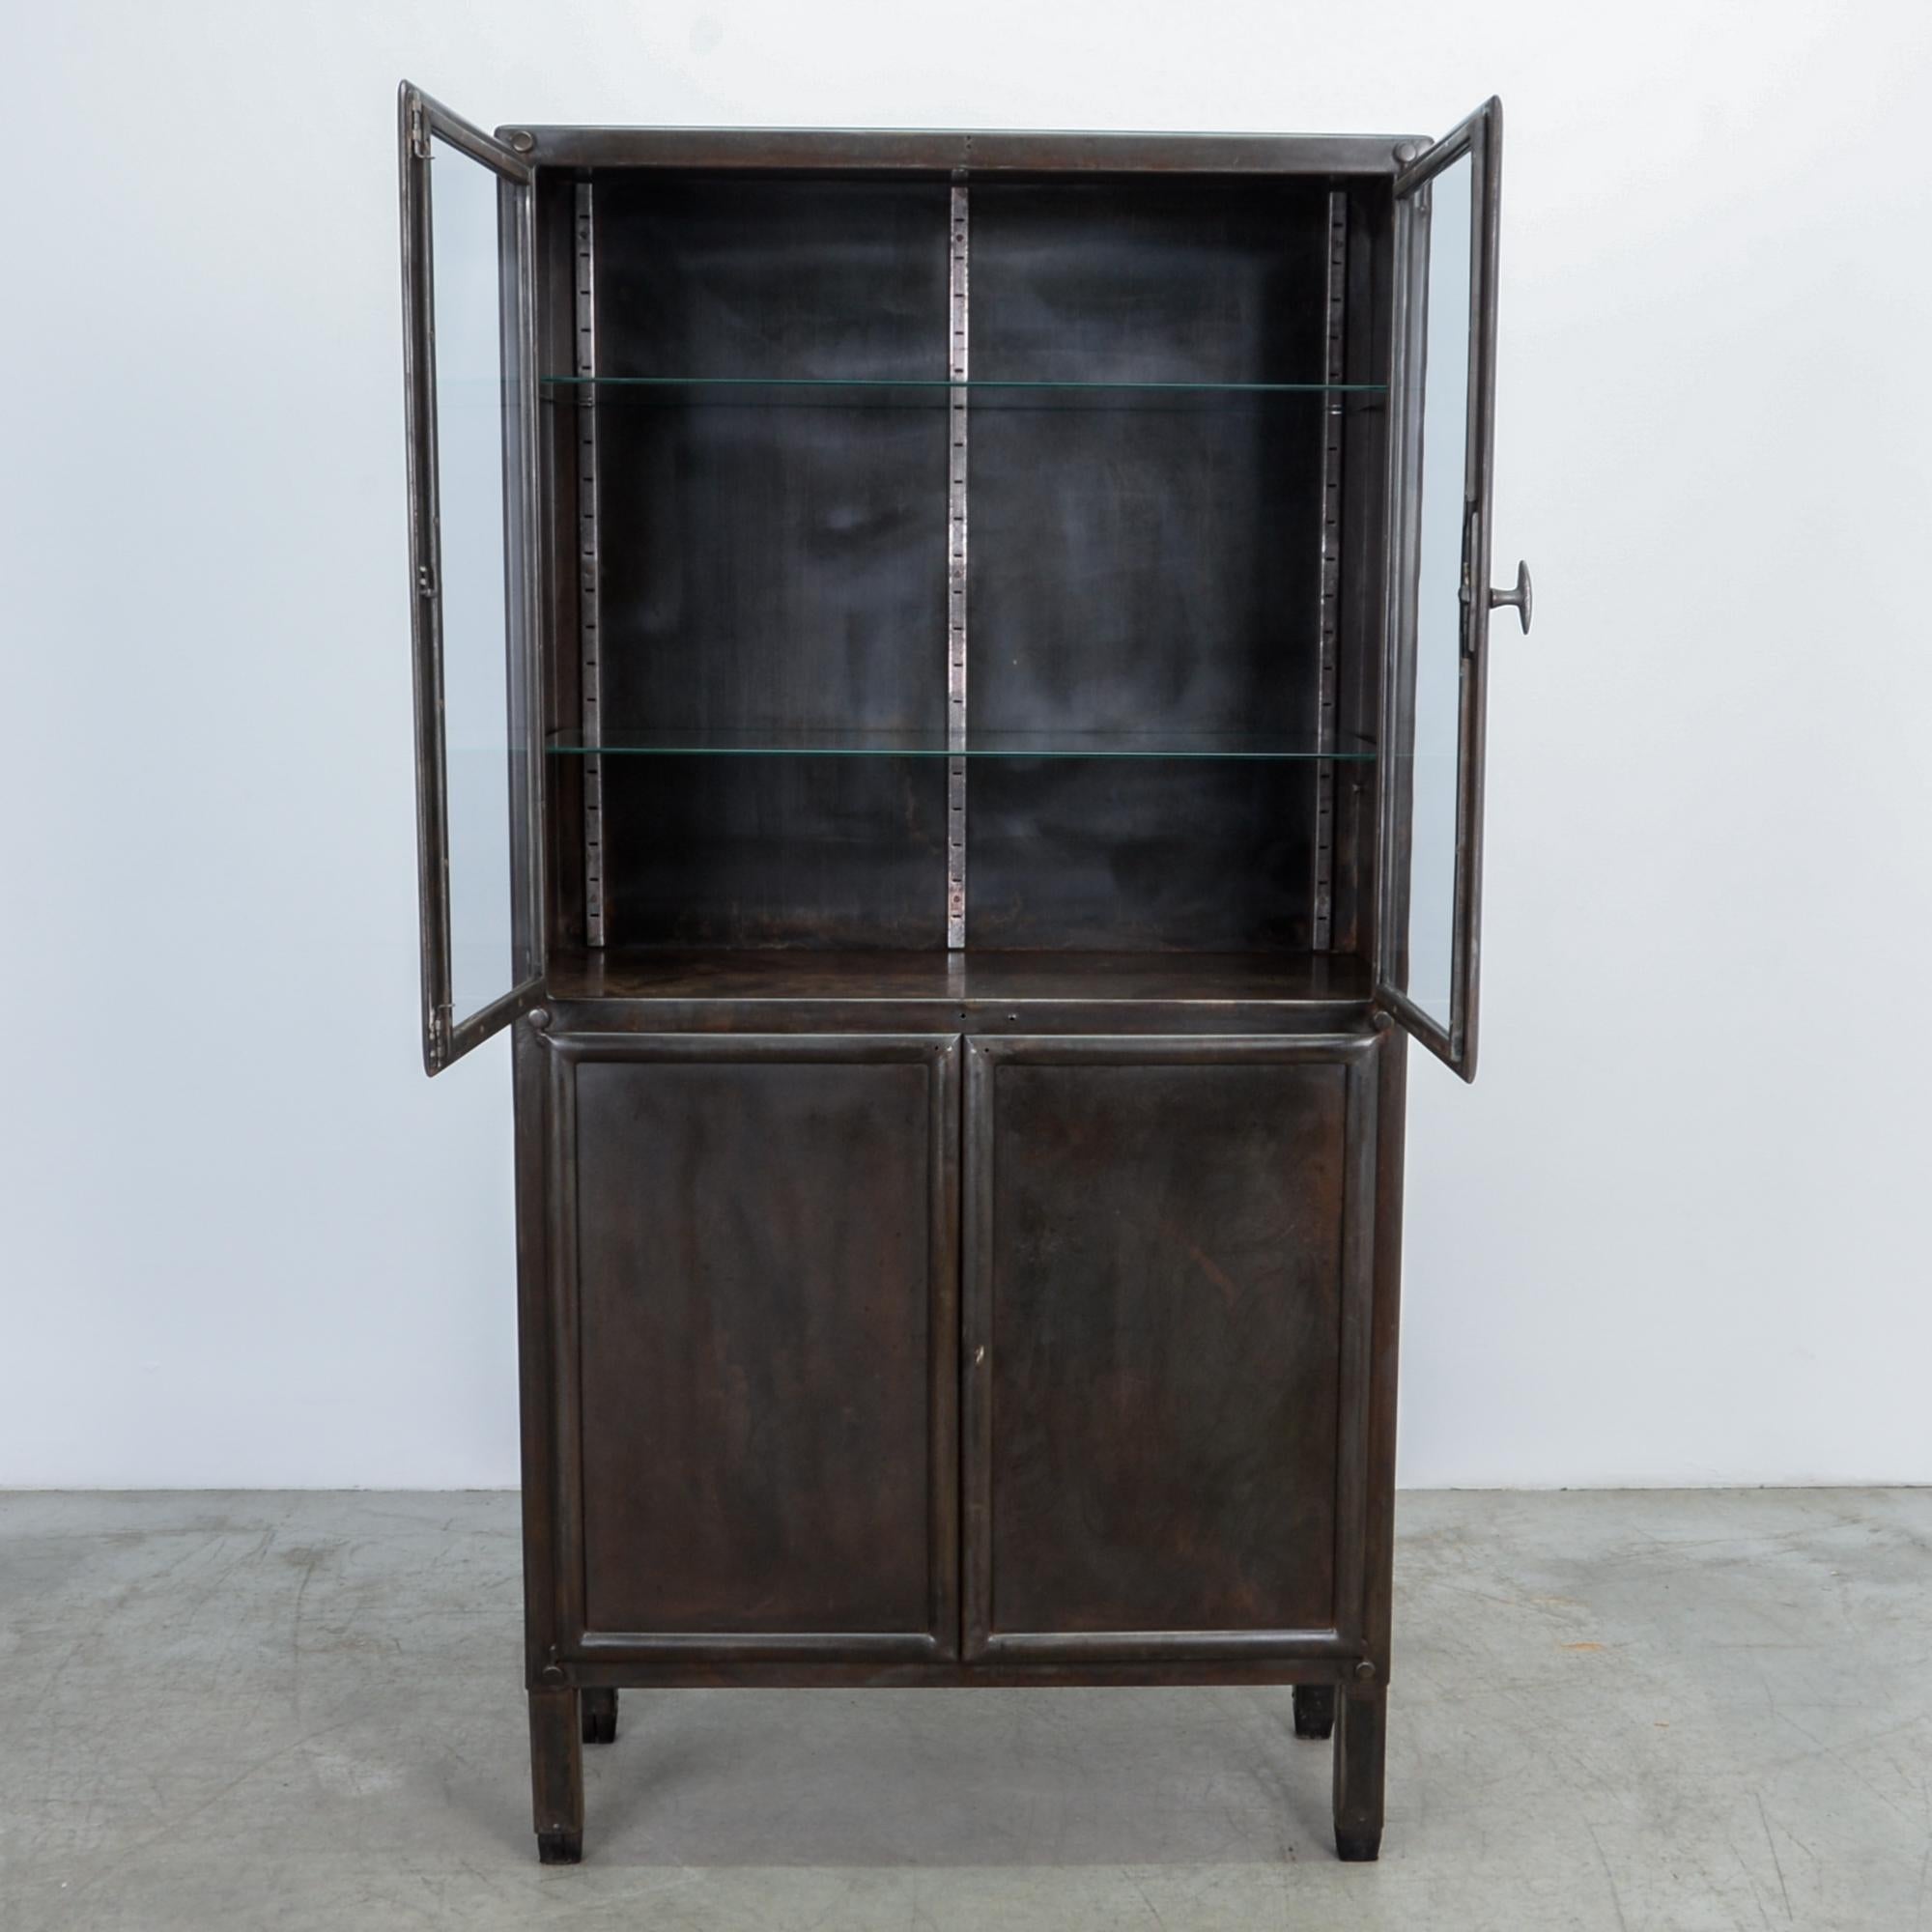 A four-door tall metal vitrine from Czech Republic, circa 1950. This polished steel cabinet was originally designed for Industrial use. The glass interior shelves, and textured steel backdrop make a great frame for display.